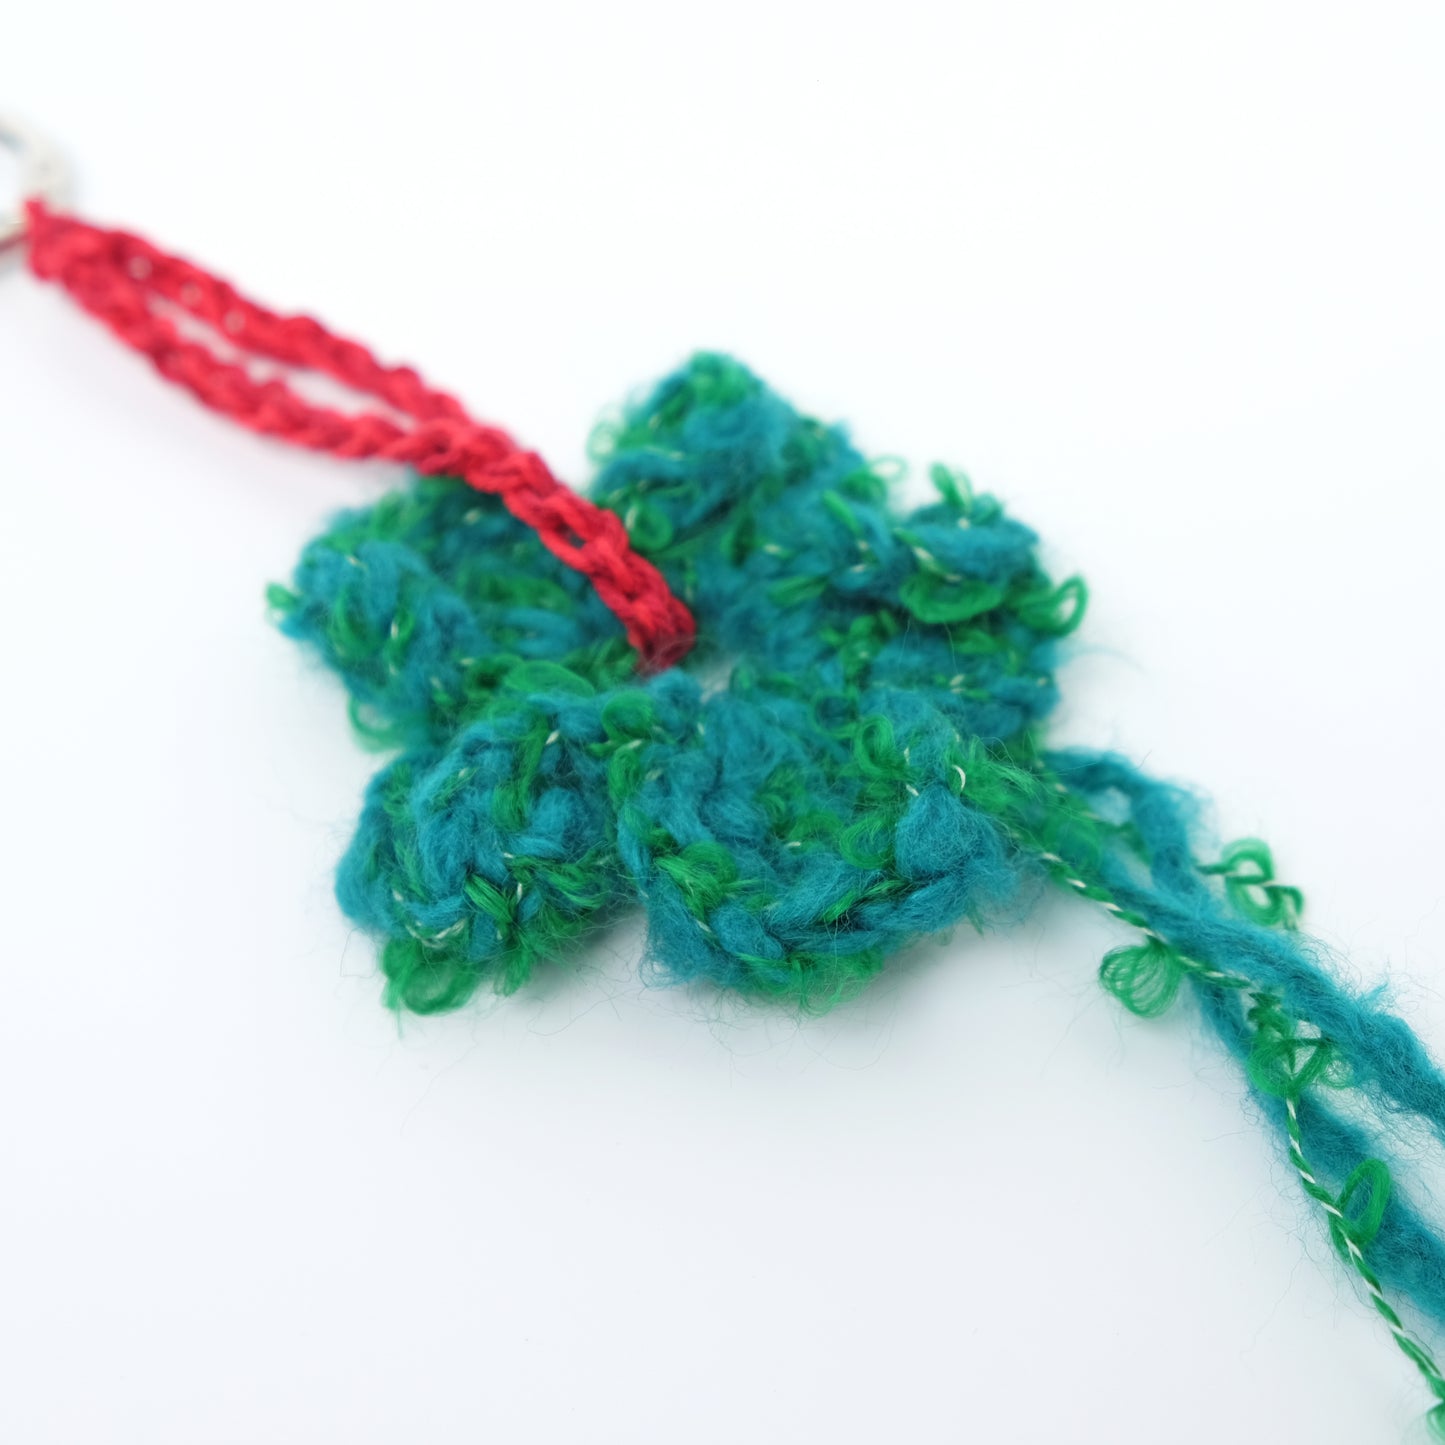 Mixed Blossom Keychain in green